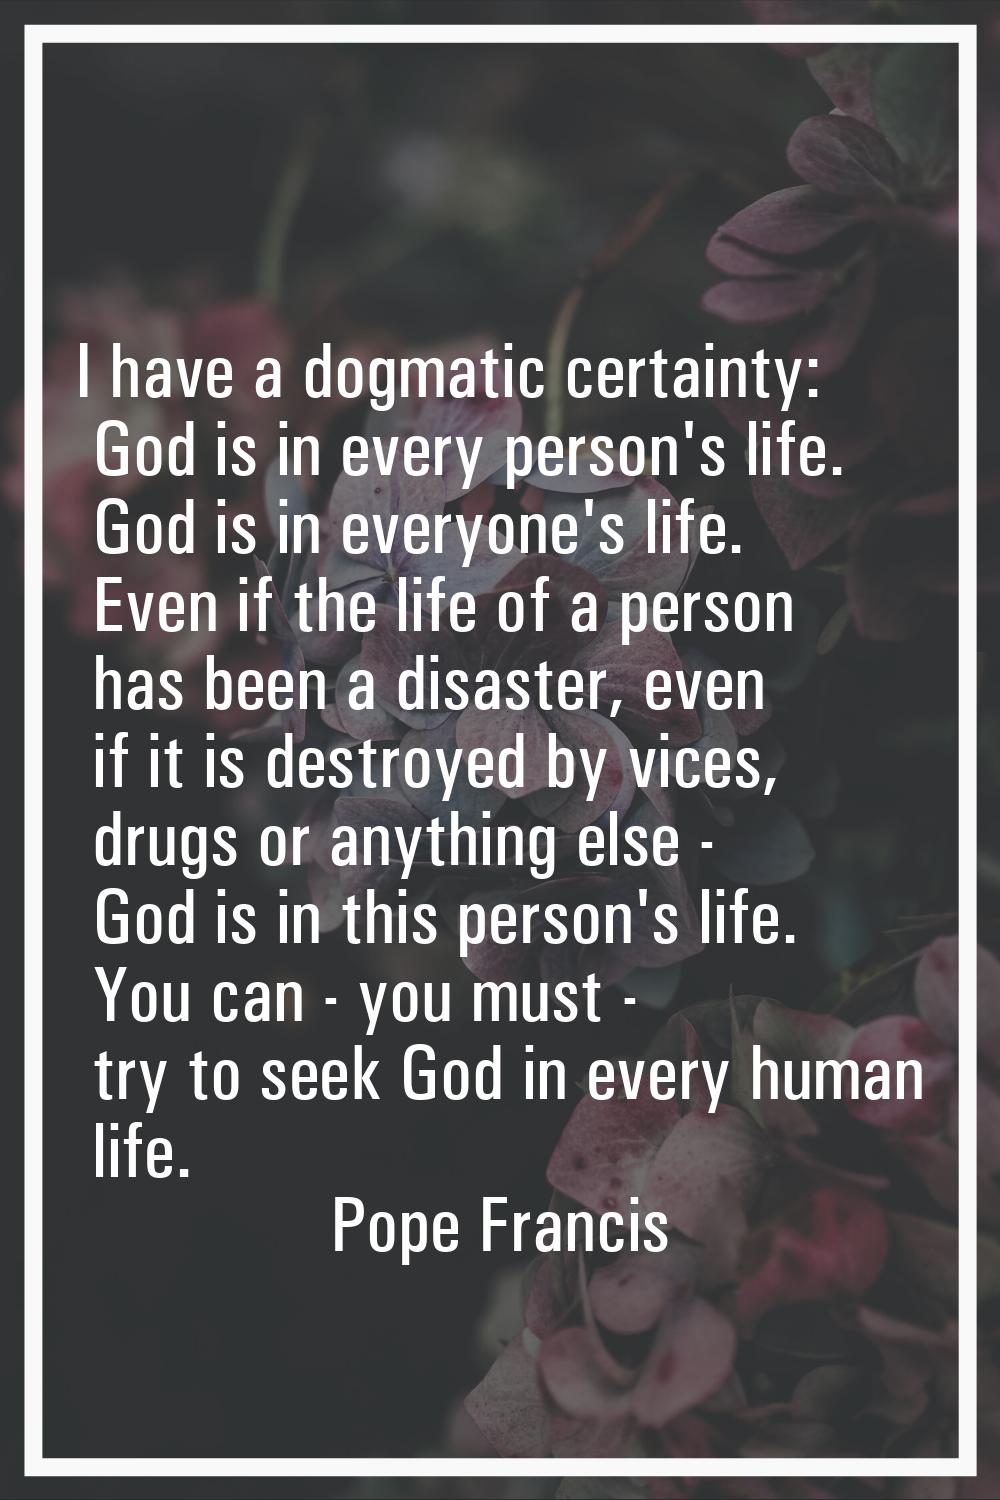 I have a dogmatic certainty: God is in every person's life. God is in everyone's life. Even if the 